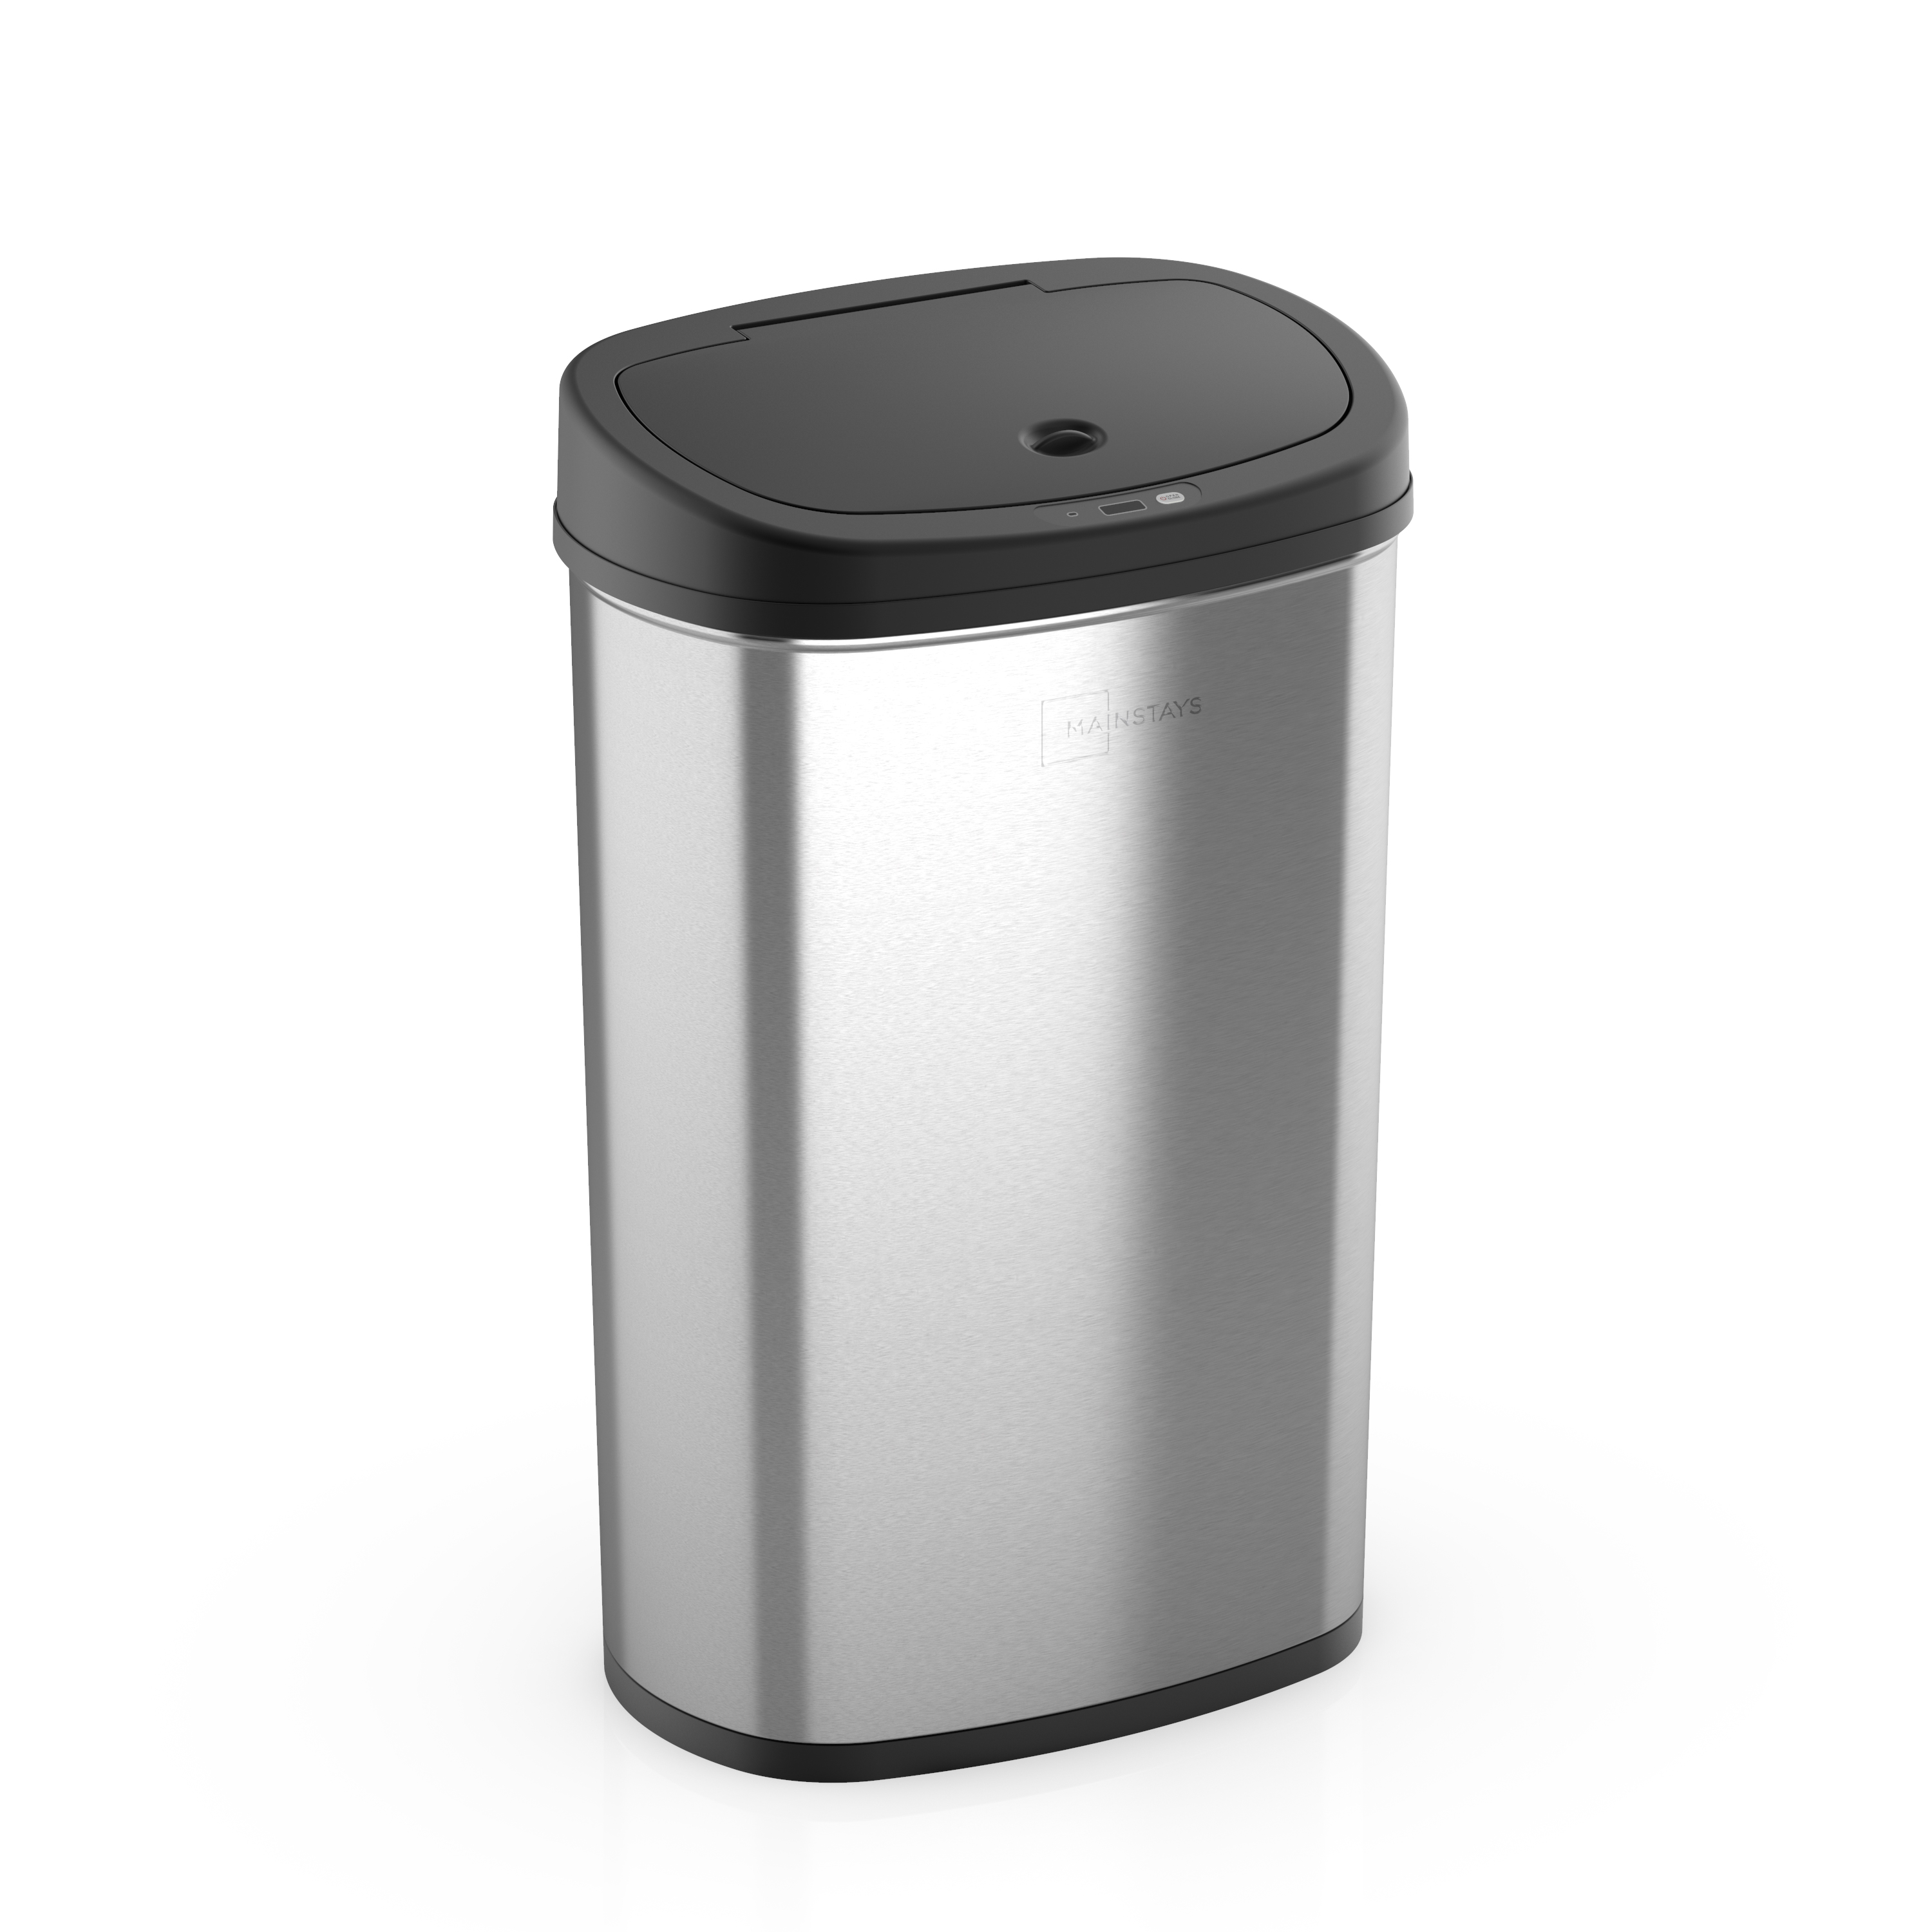 In store only/ YMMV: Mainstays 13.2-Gallon Motion Sensor Stainless Steel Trash Can (Various Colors) $20.00 at Walmart